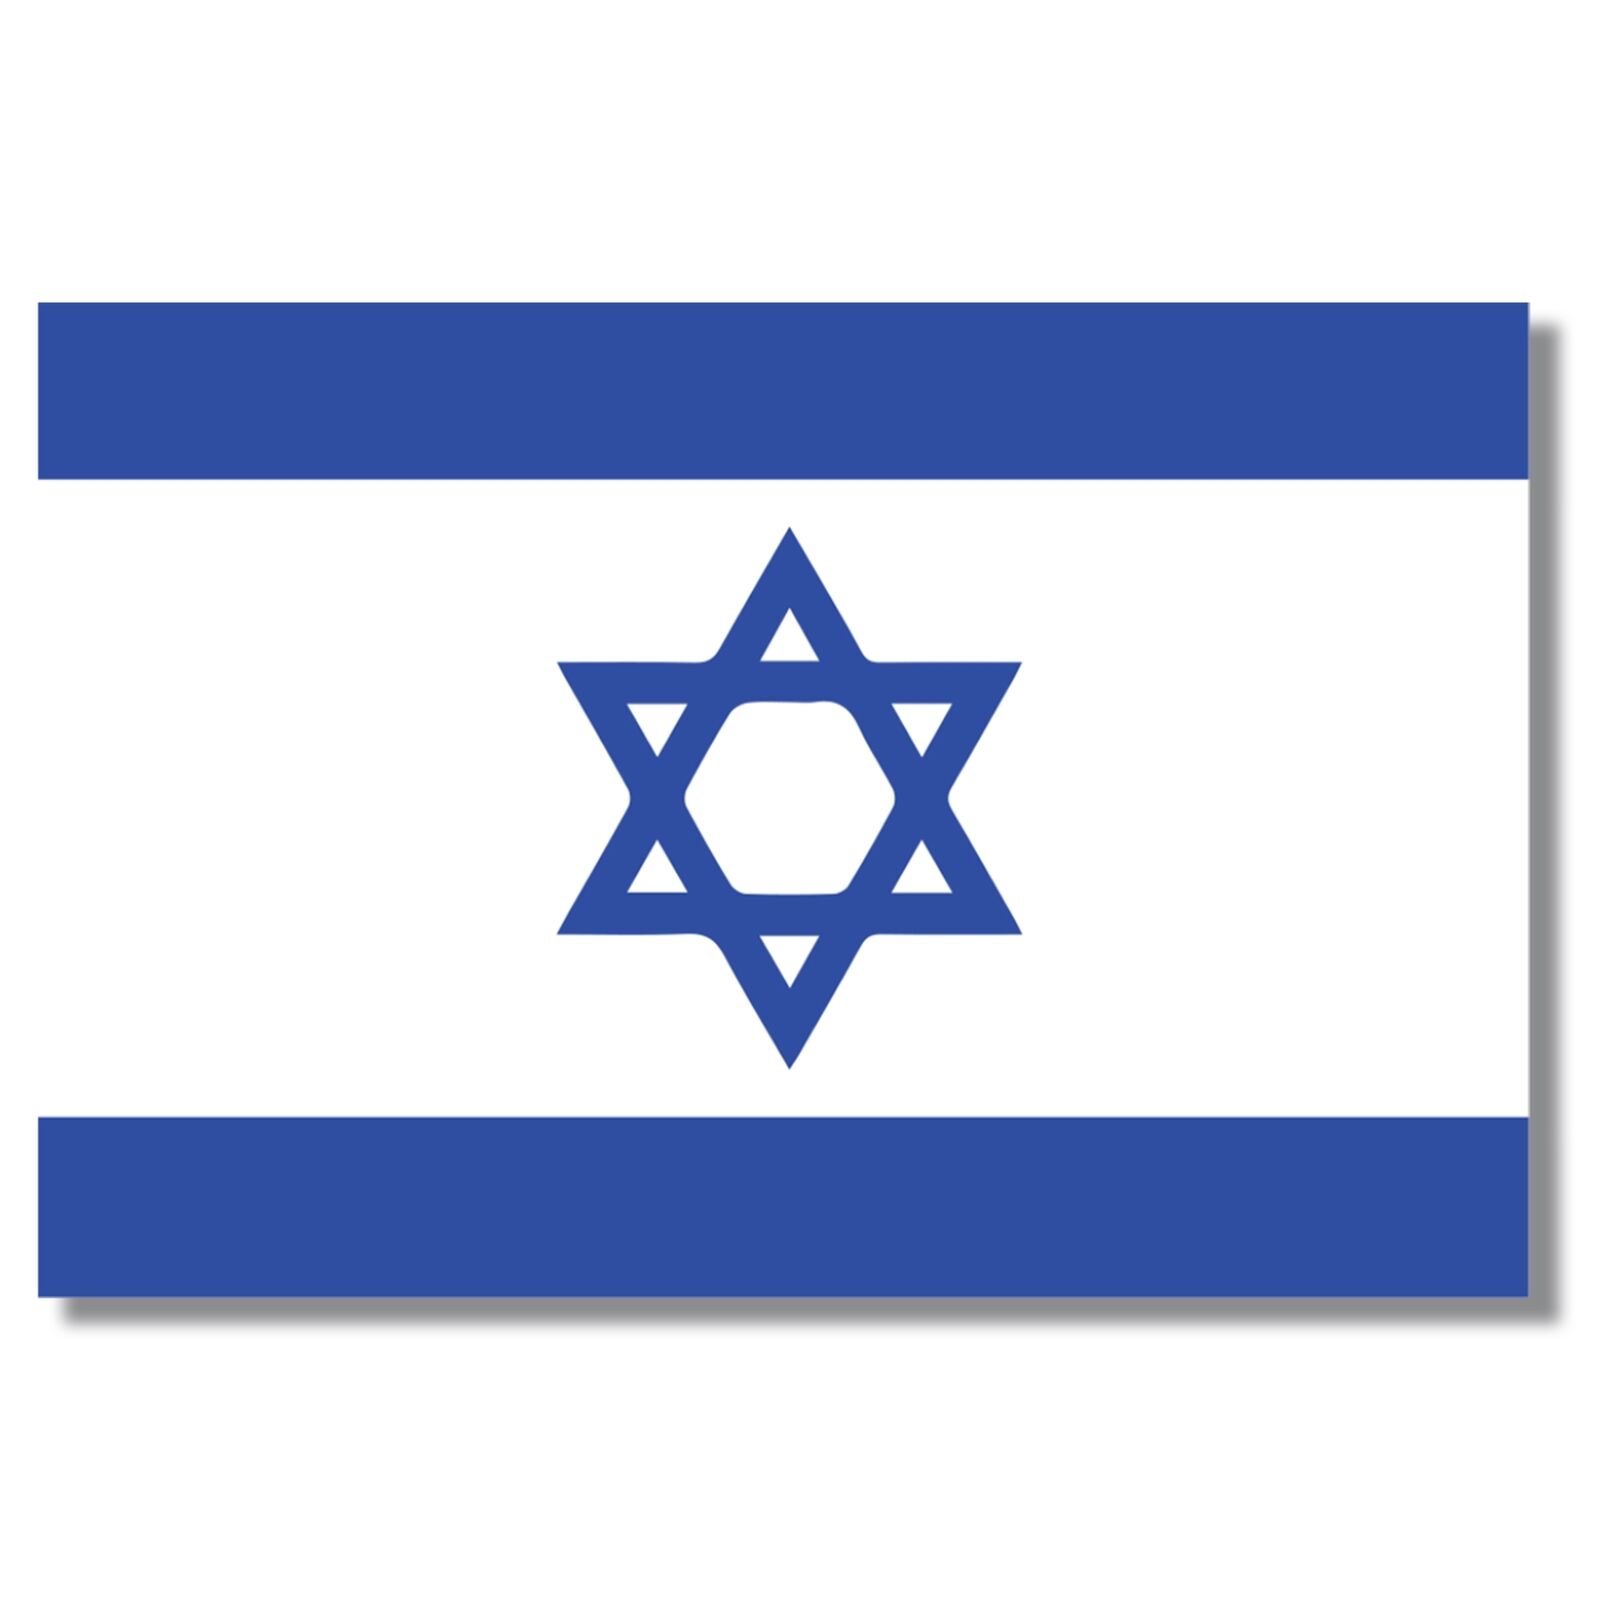 Israel Israeli Flag Magnet Decal, 5x8 Inches, Blue and White, Automotive Magnet